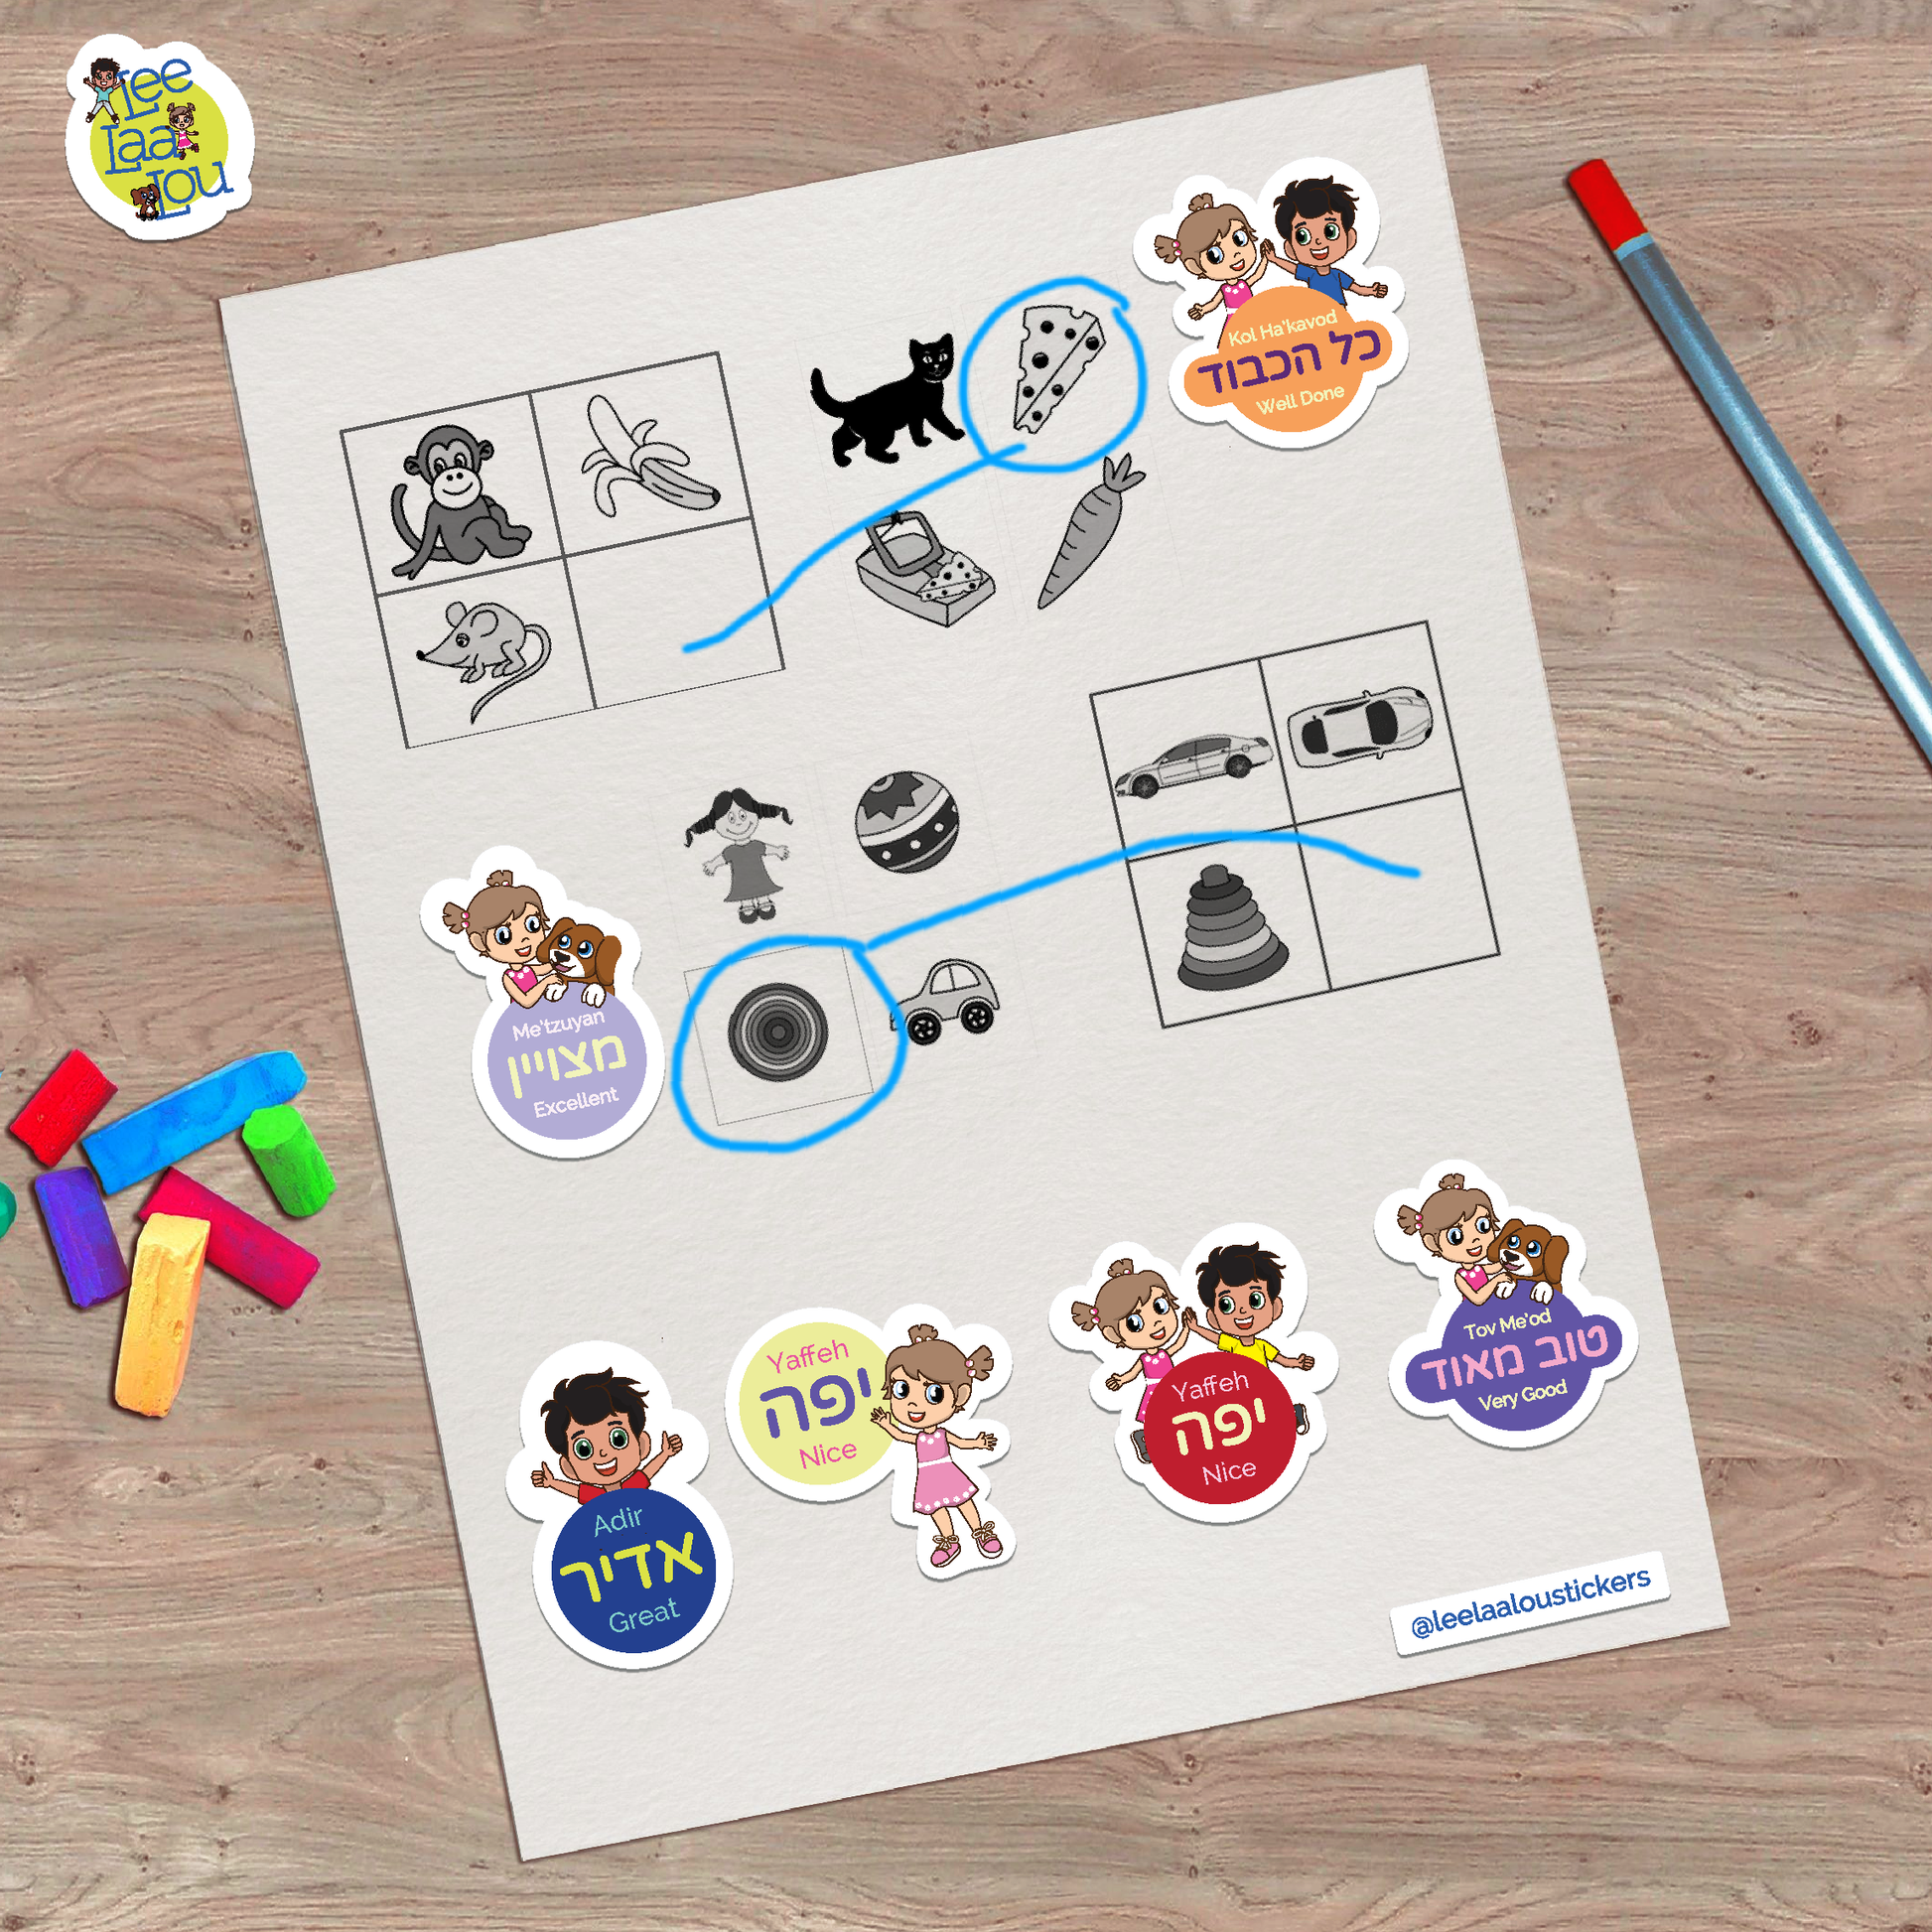 Encouragement stickers in Hebrew and English. Learn how to encourage kids in Hebrew and teach them at the same time. Great stickers for parents, teachers, educators and kids.